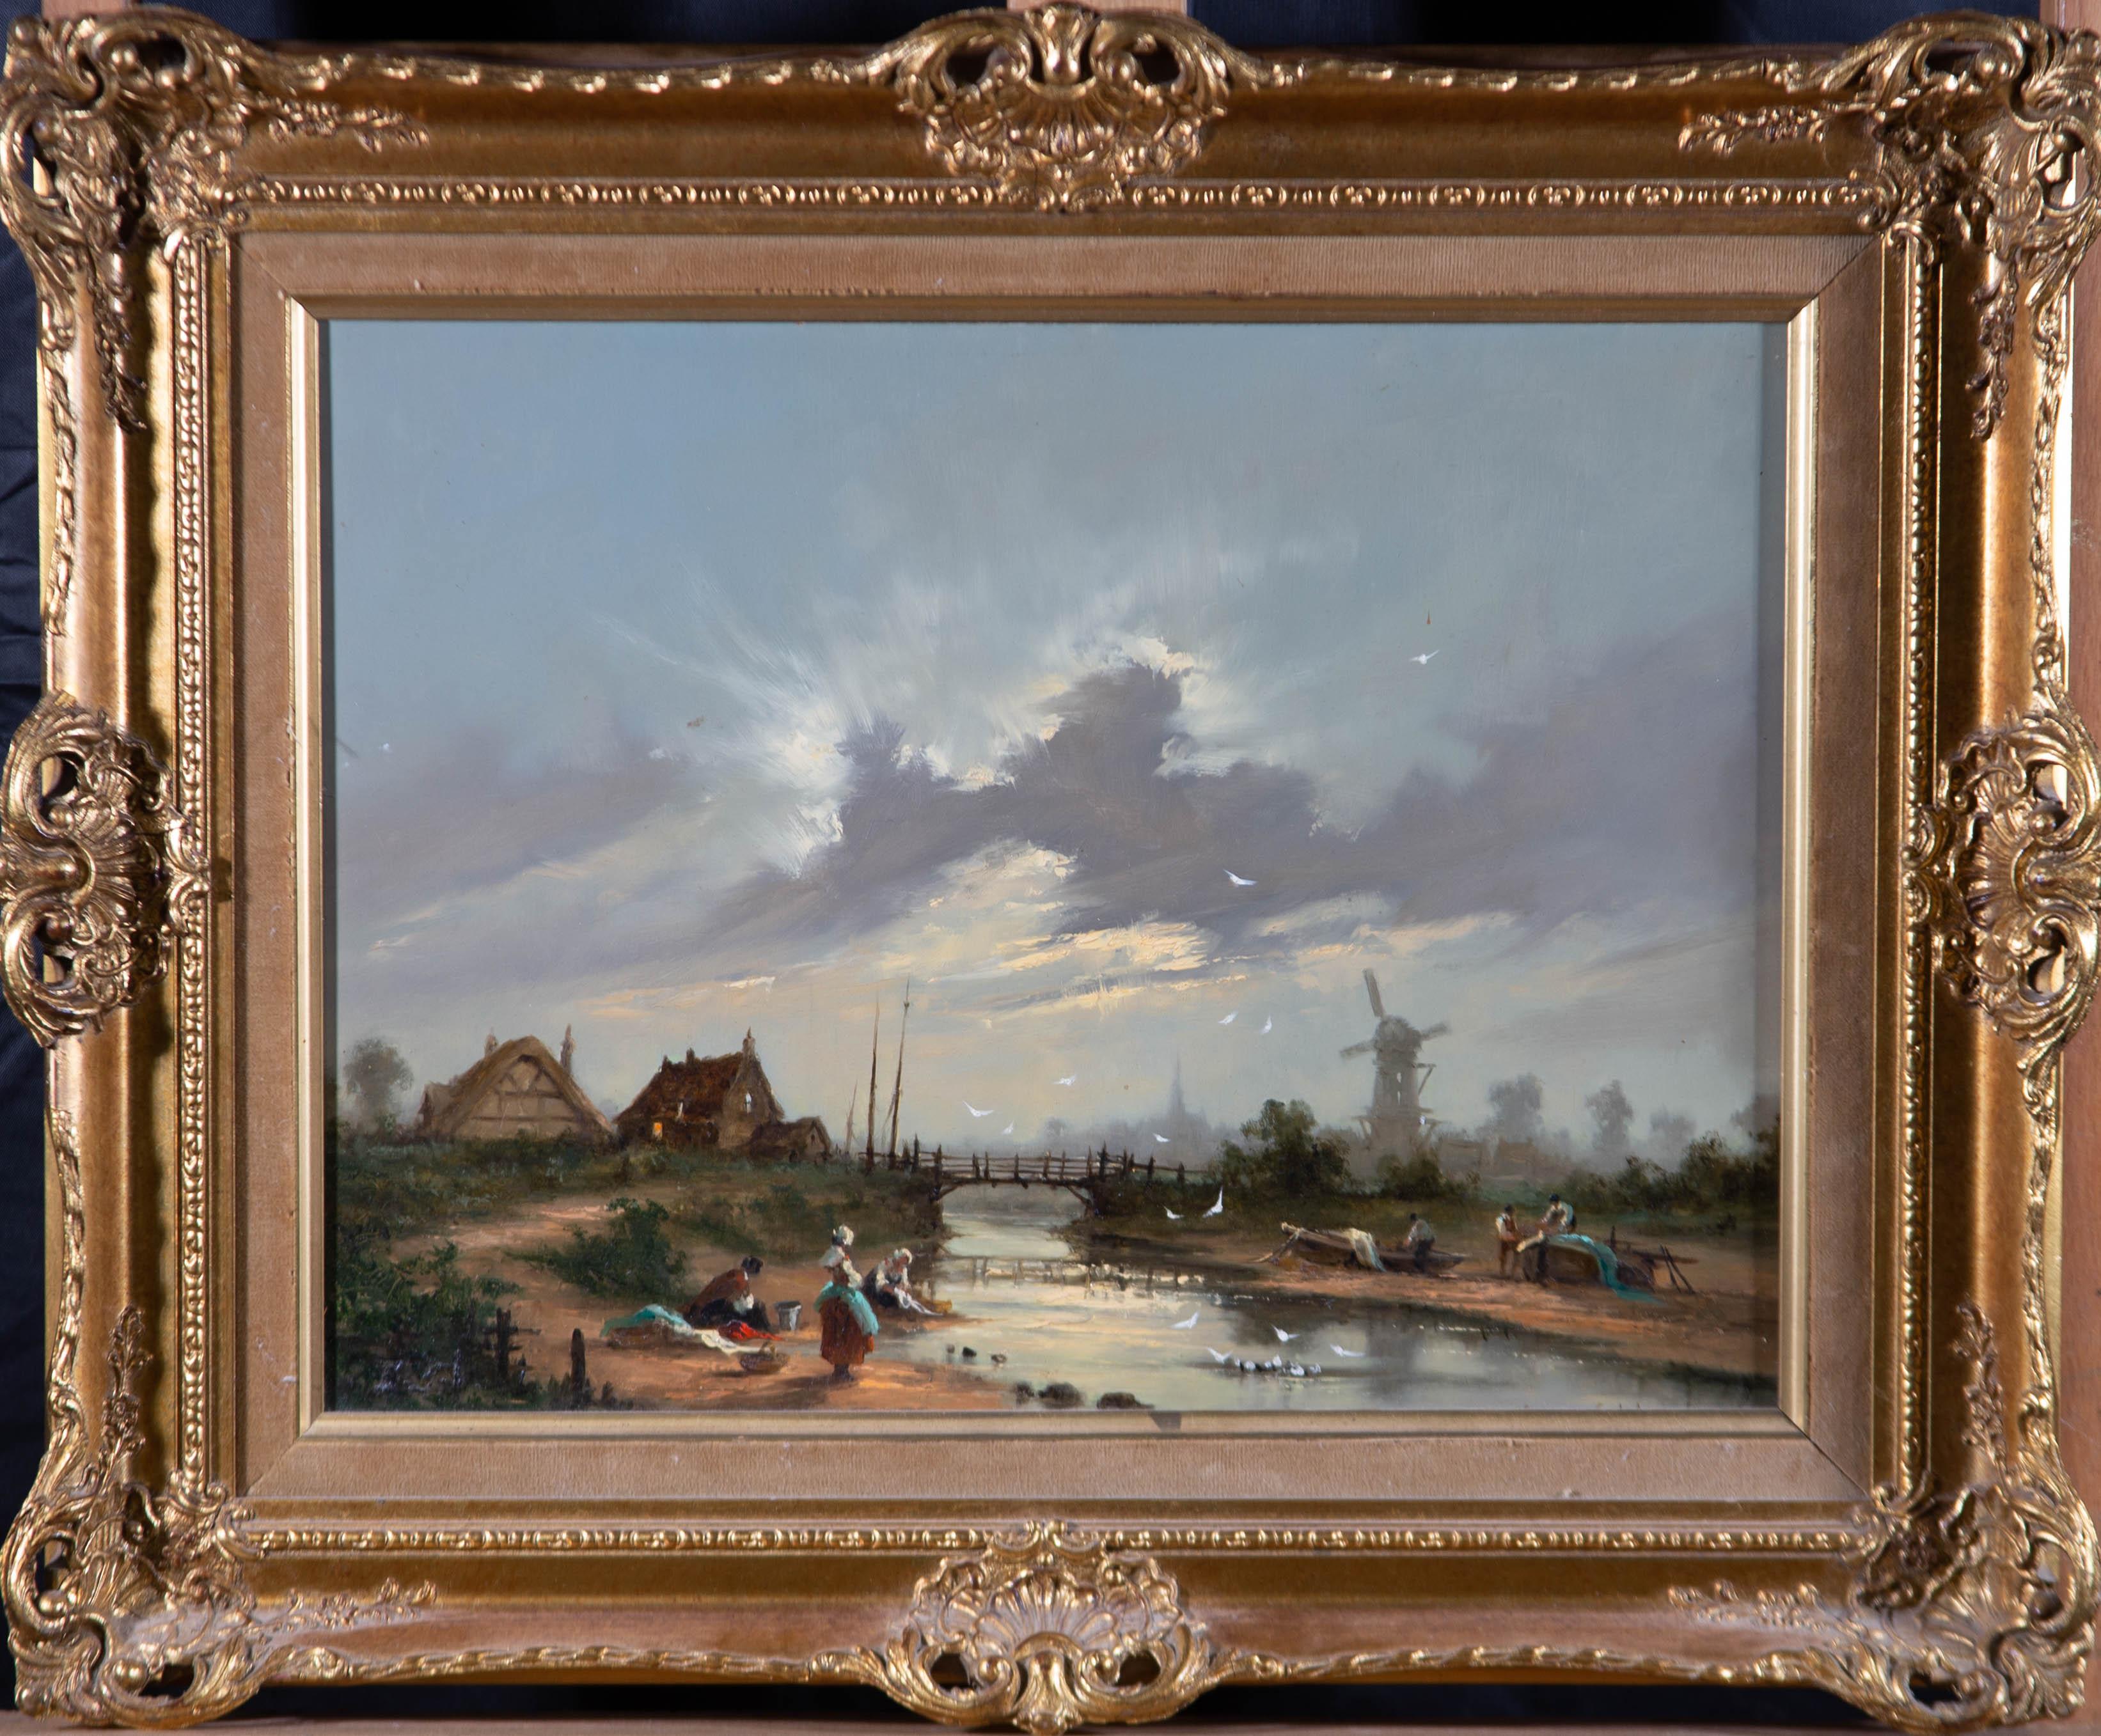 Unknown Landscape Painting - Barbara Gudrun Sibbons (b.1925) - Signed & Framed 20th Century Oil, Dutch Scene